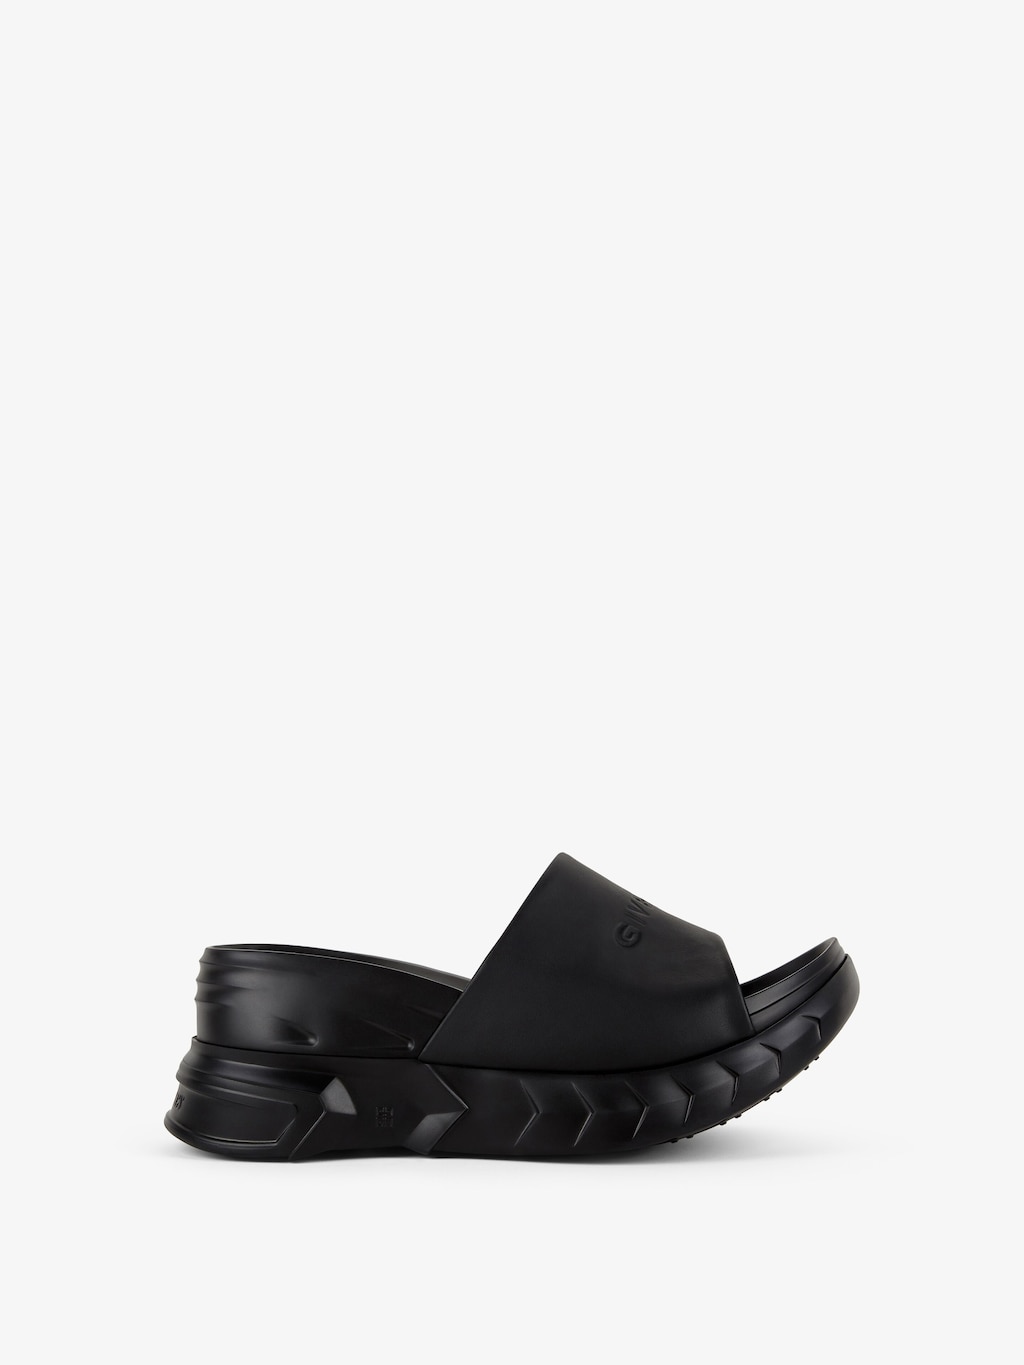 Marshmallow wedge sandals in leather - black | Givenchy US